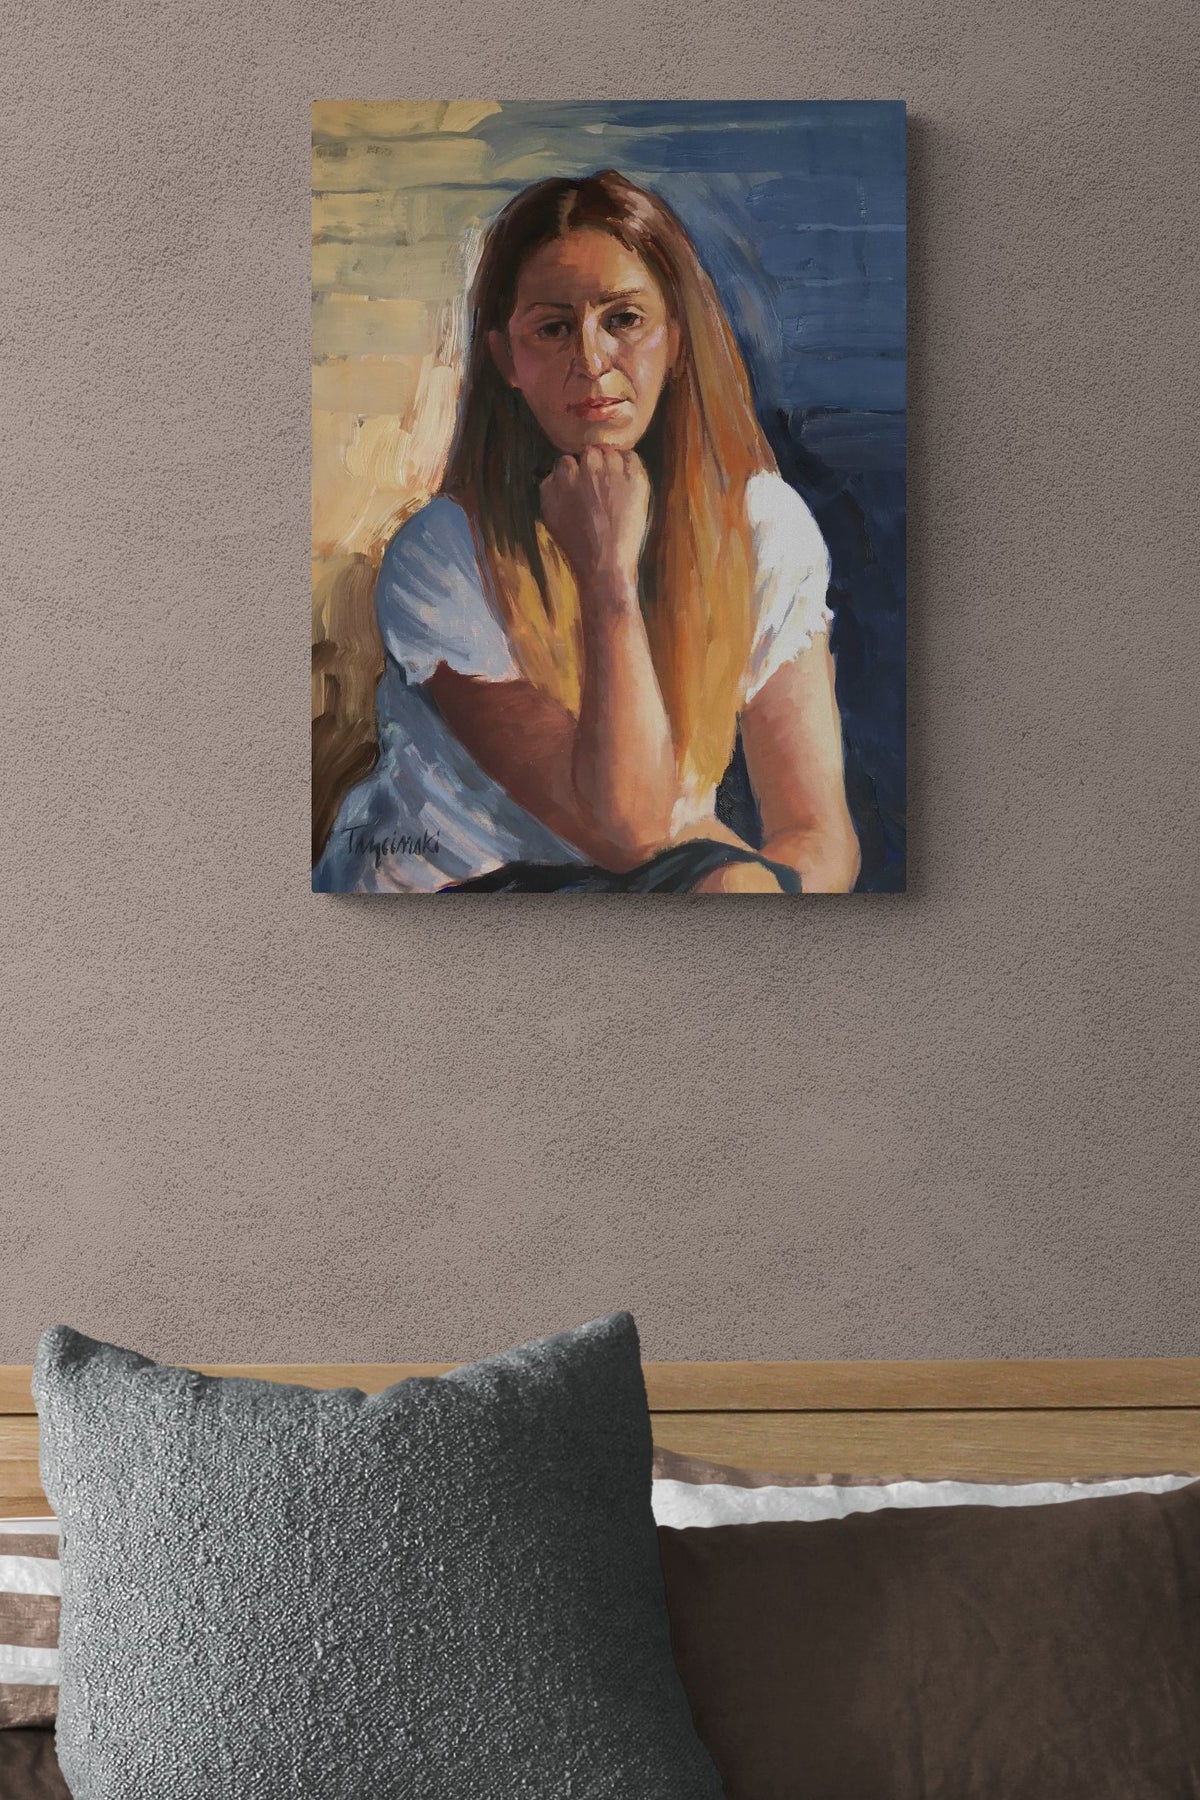 Intimate female figurative art brings feeling, emotion and balance into this bedroom